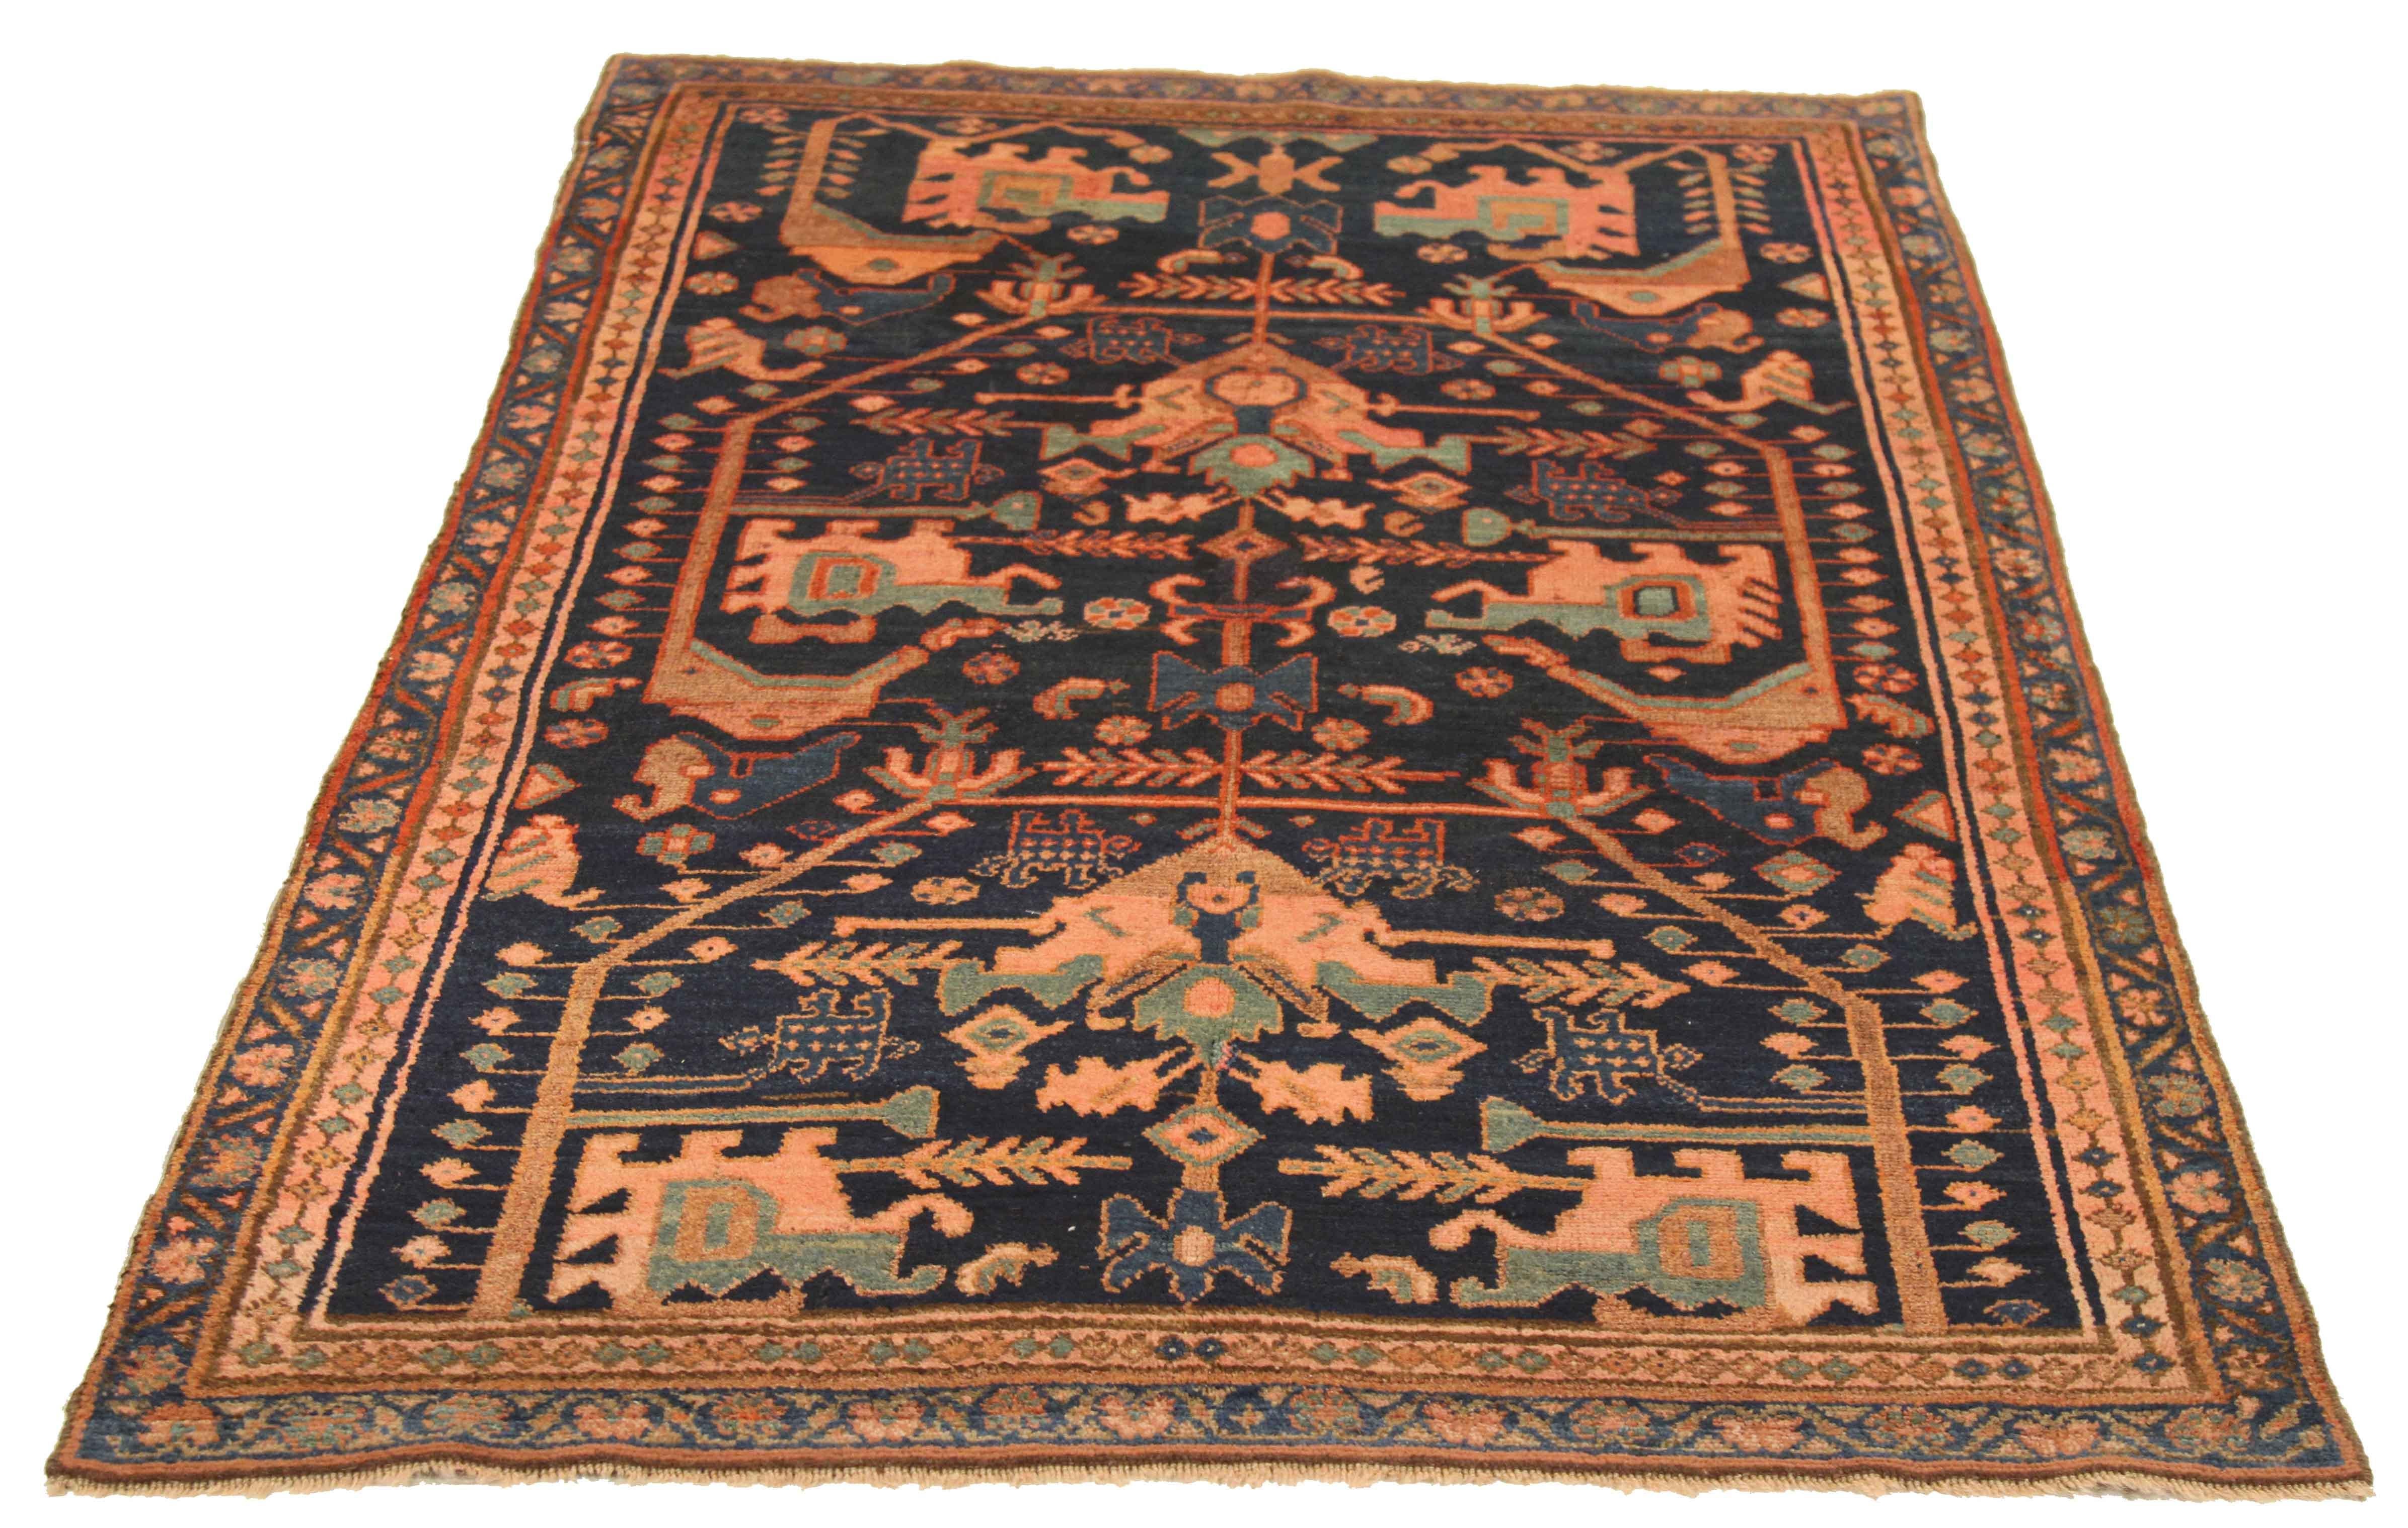 Oushak Antique Persian Hamedan Rug with Red and Green Mixed Animal and Floral Patterns For Sale